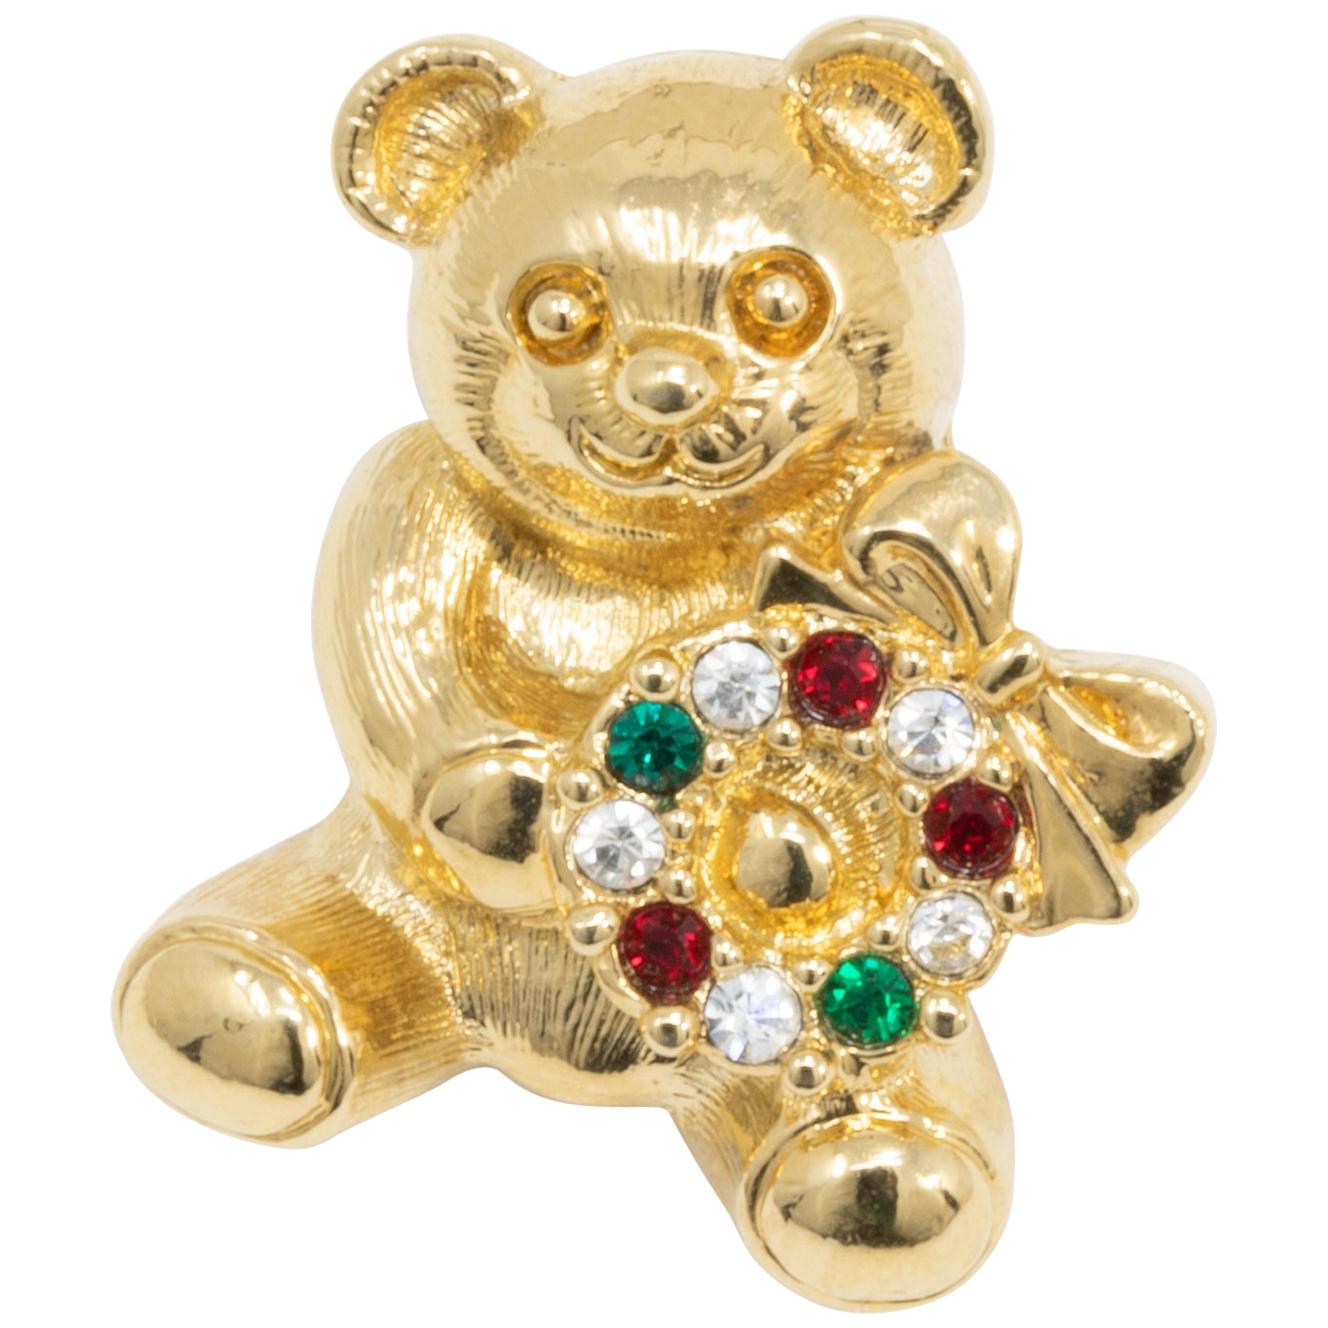 Gold Festive Teddy Bear and Wreath Pin, Red White and Green Crystals